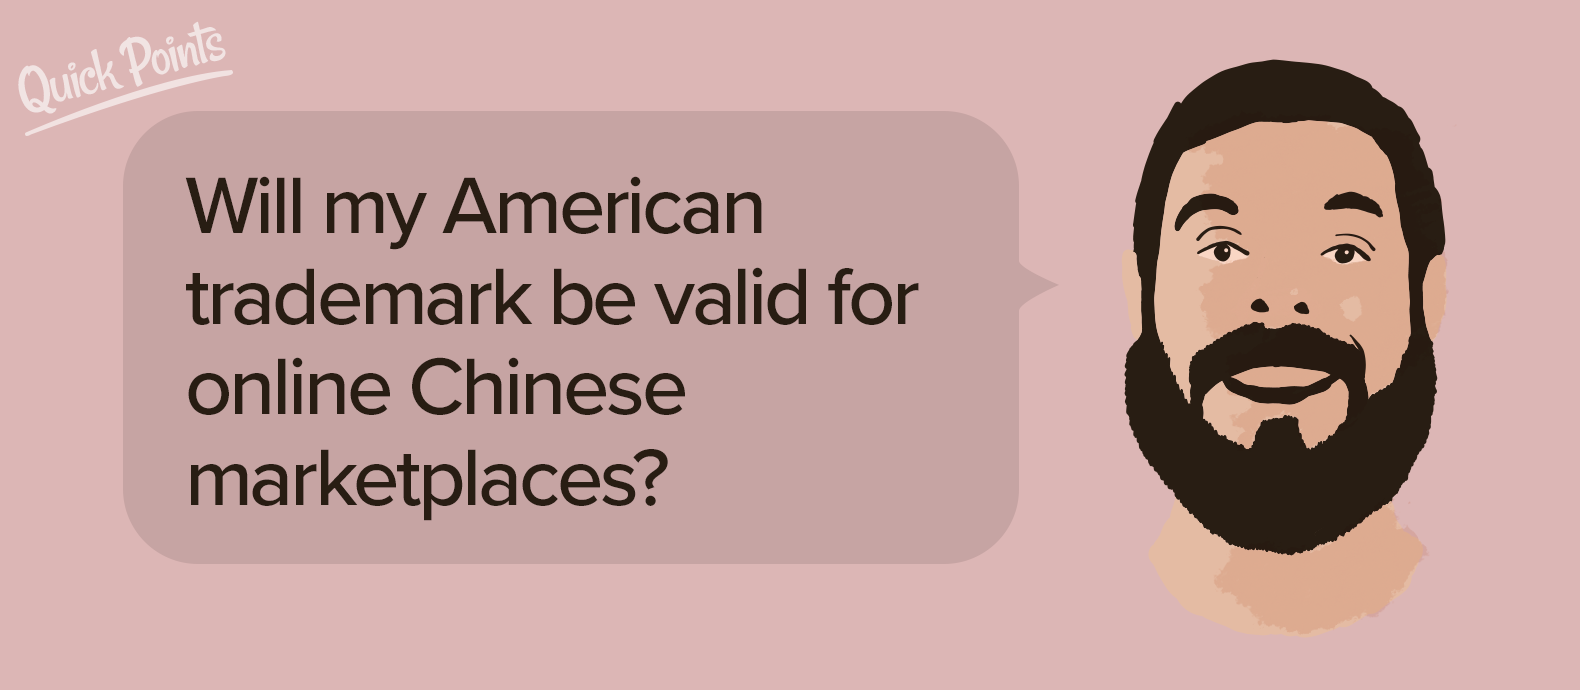 Will my American trademark be valid for online Chinese marketplaces?